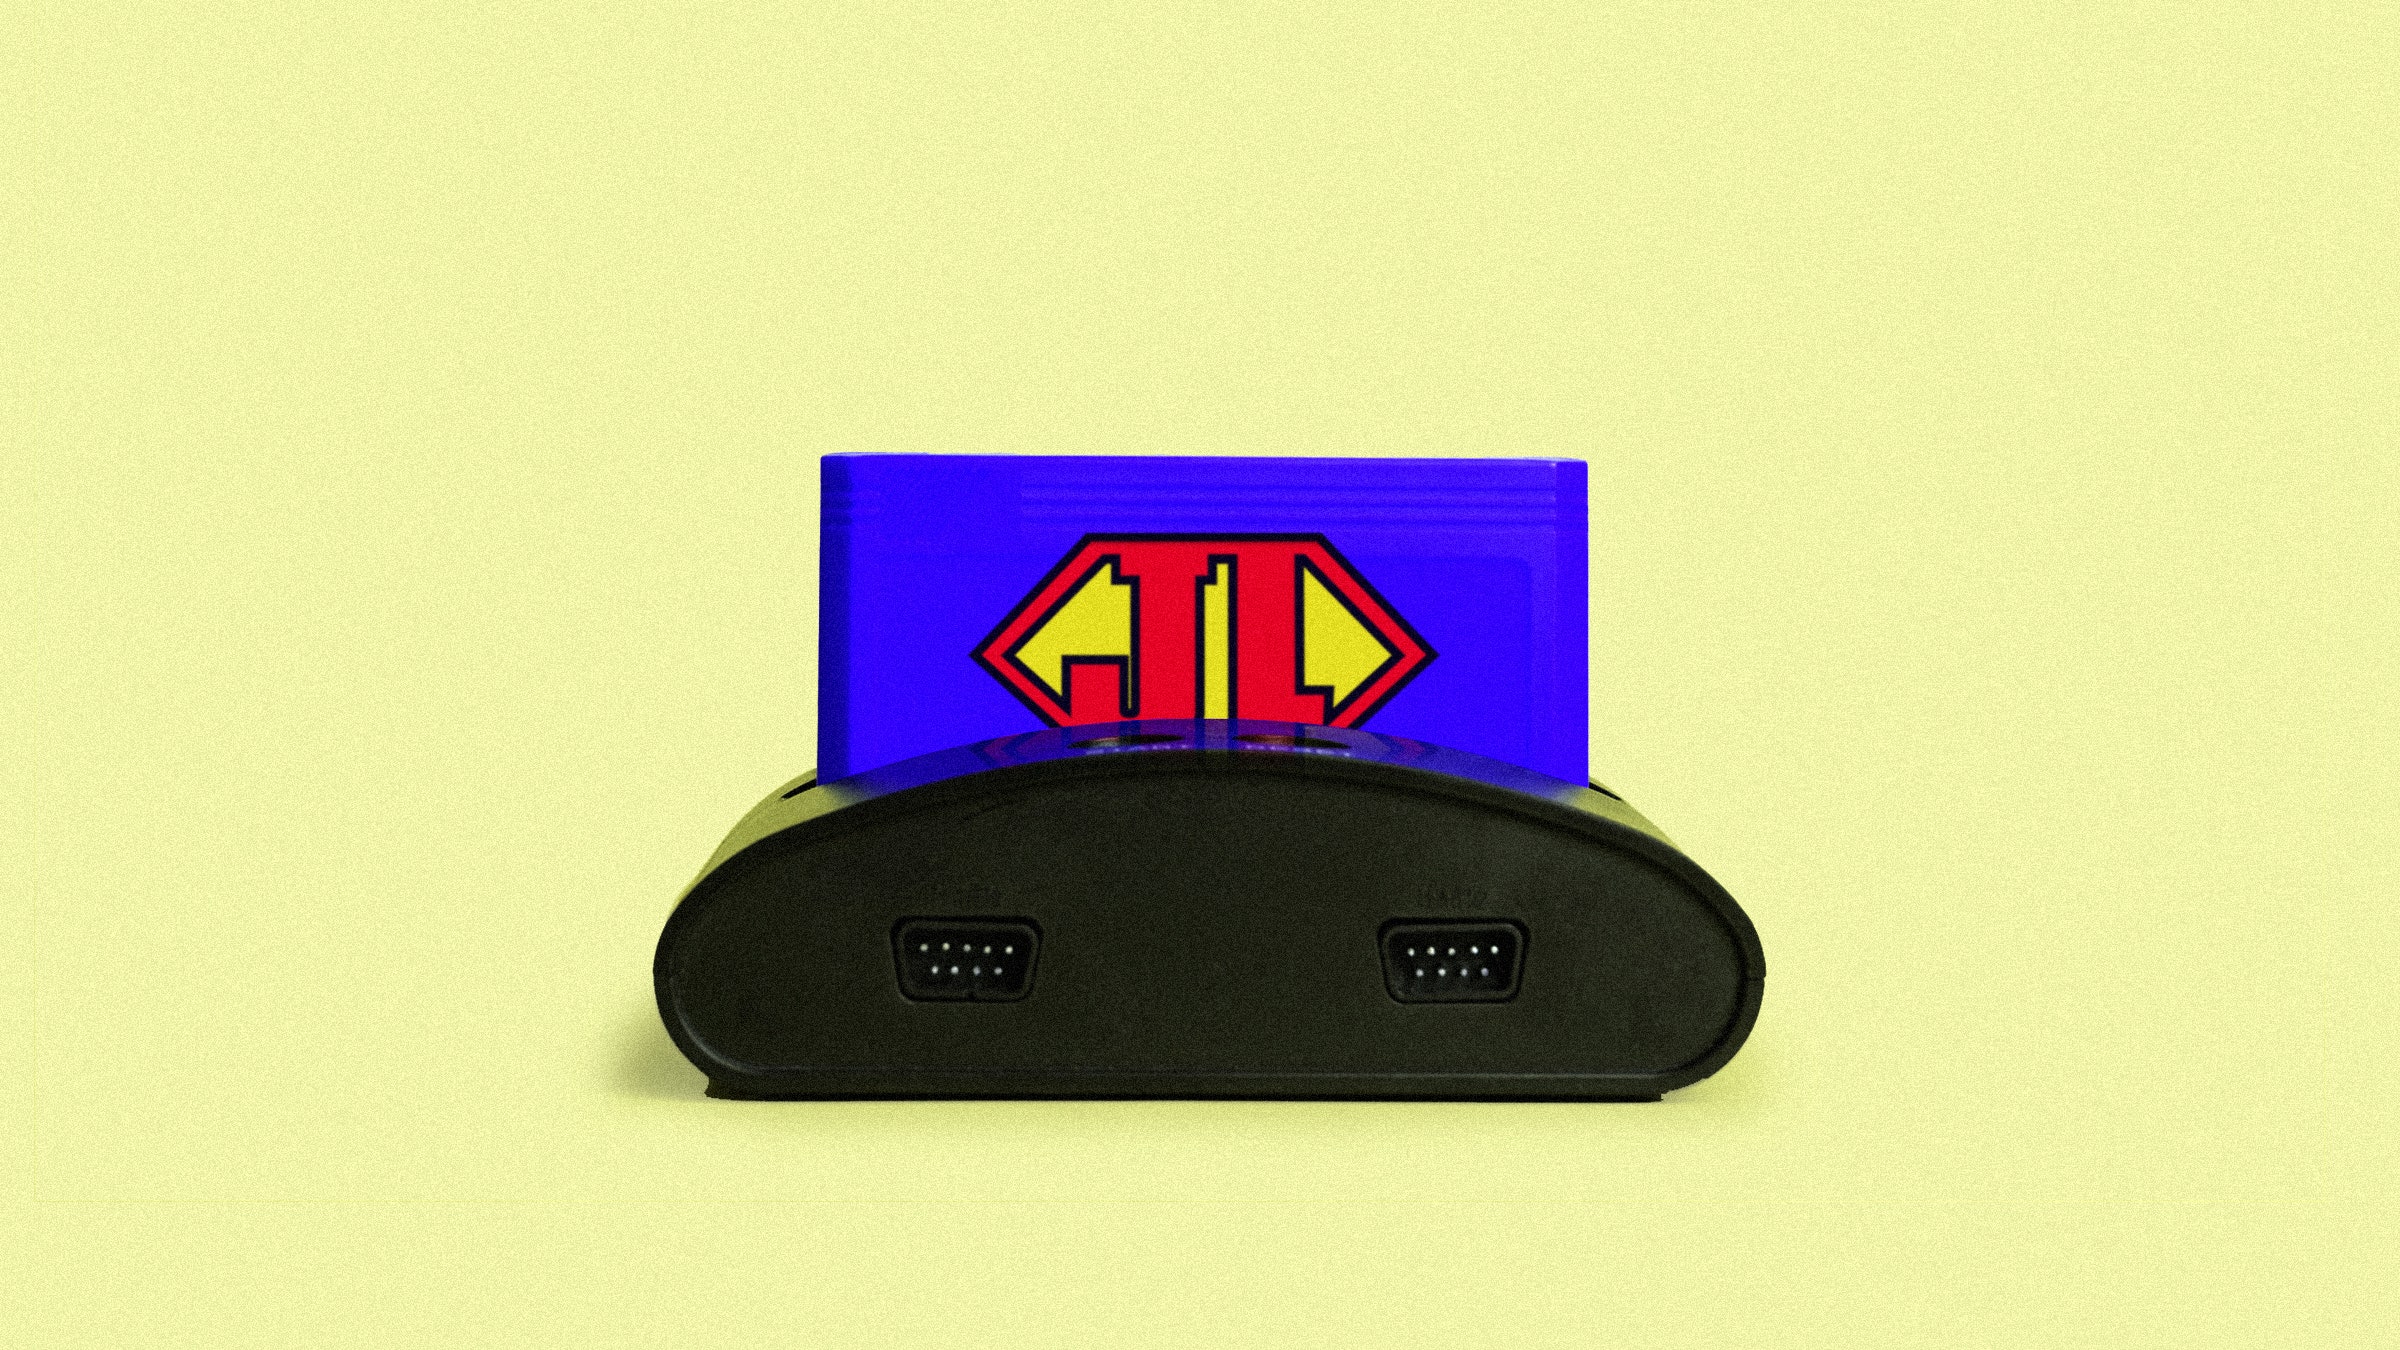 Old retro video game console with cartridge and a JL in a superman style.